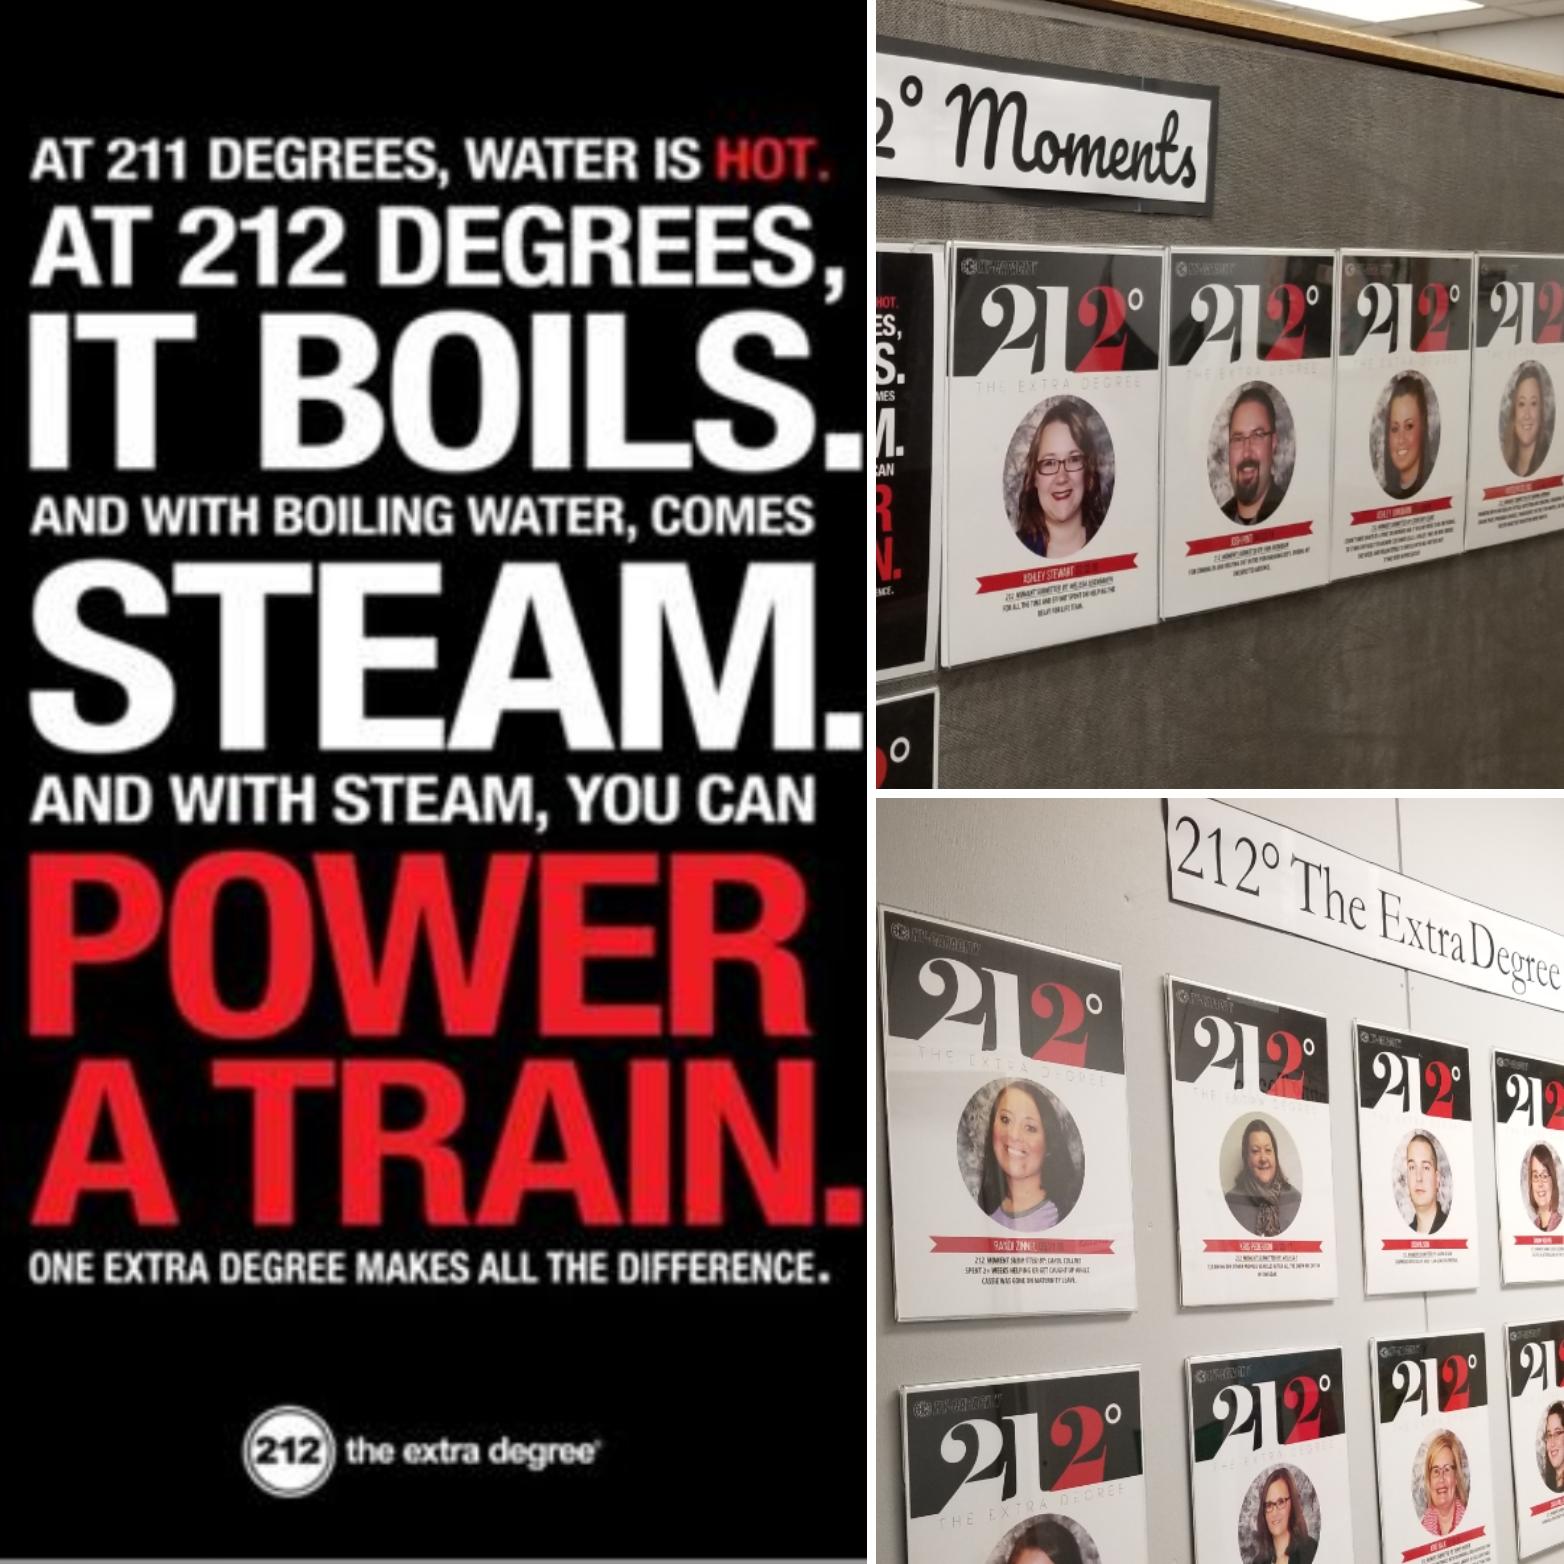 At 211 degrees, water is hot. At 212 degrees, it boils. And with boiling water, comes steam. And with steam, you can power a train. Just one degree makes all the difference.